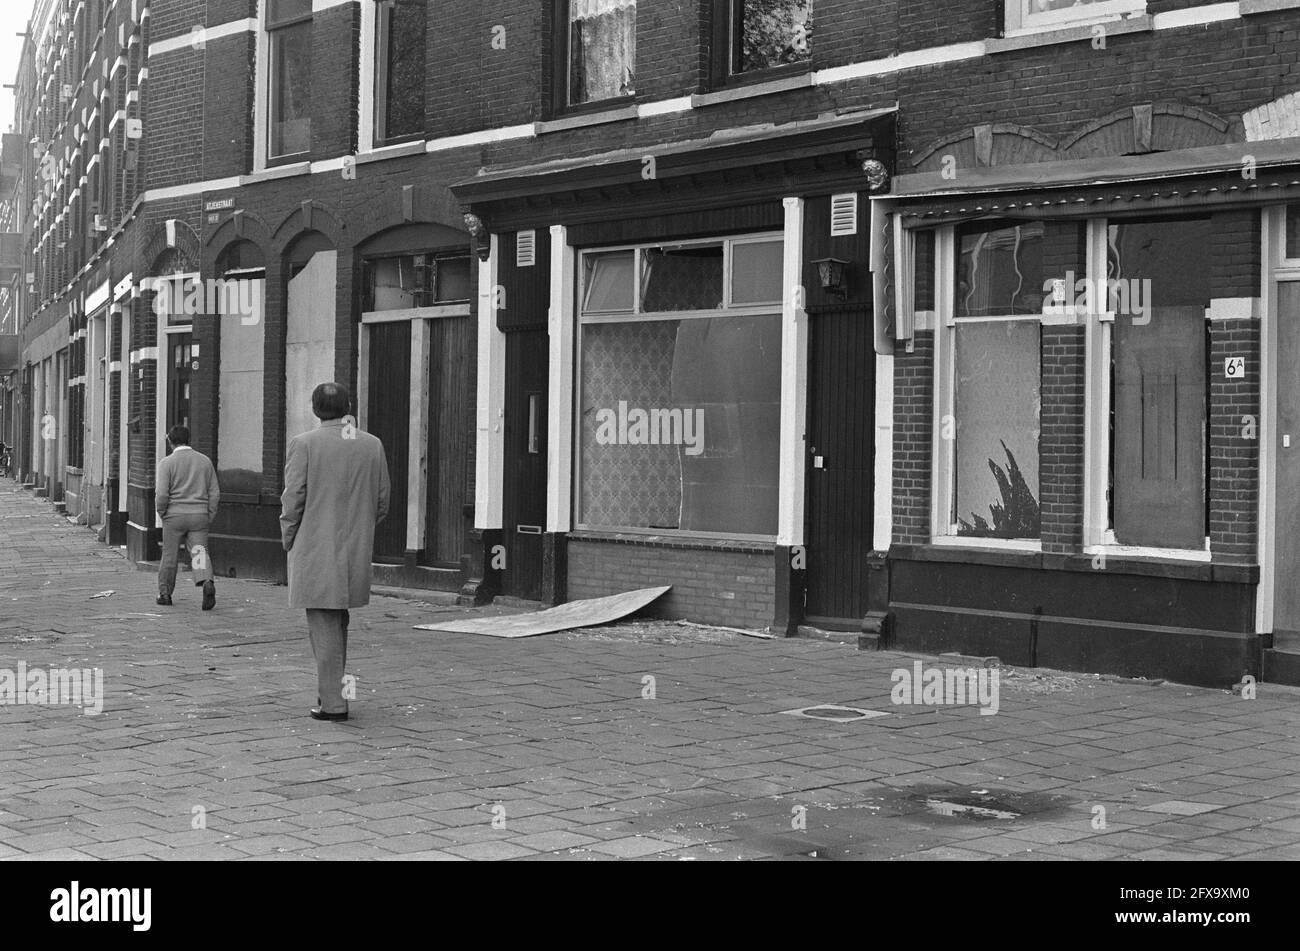 Neighbors of Katendrecht (Rotterdam) throw in windows of brothels and rearkops, October 14, 1974, BORDELEN, The Netherlands, 20th century press agency photo, news to remember, documentary, historic photography 1945-1990, visual stories, human history of the Twentieth Century, capturing moments in time Stock Photo